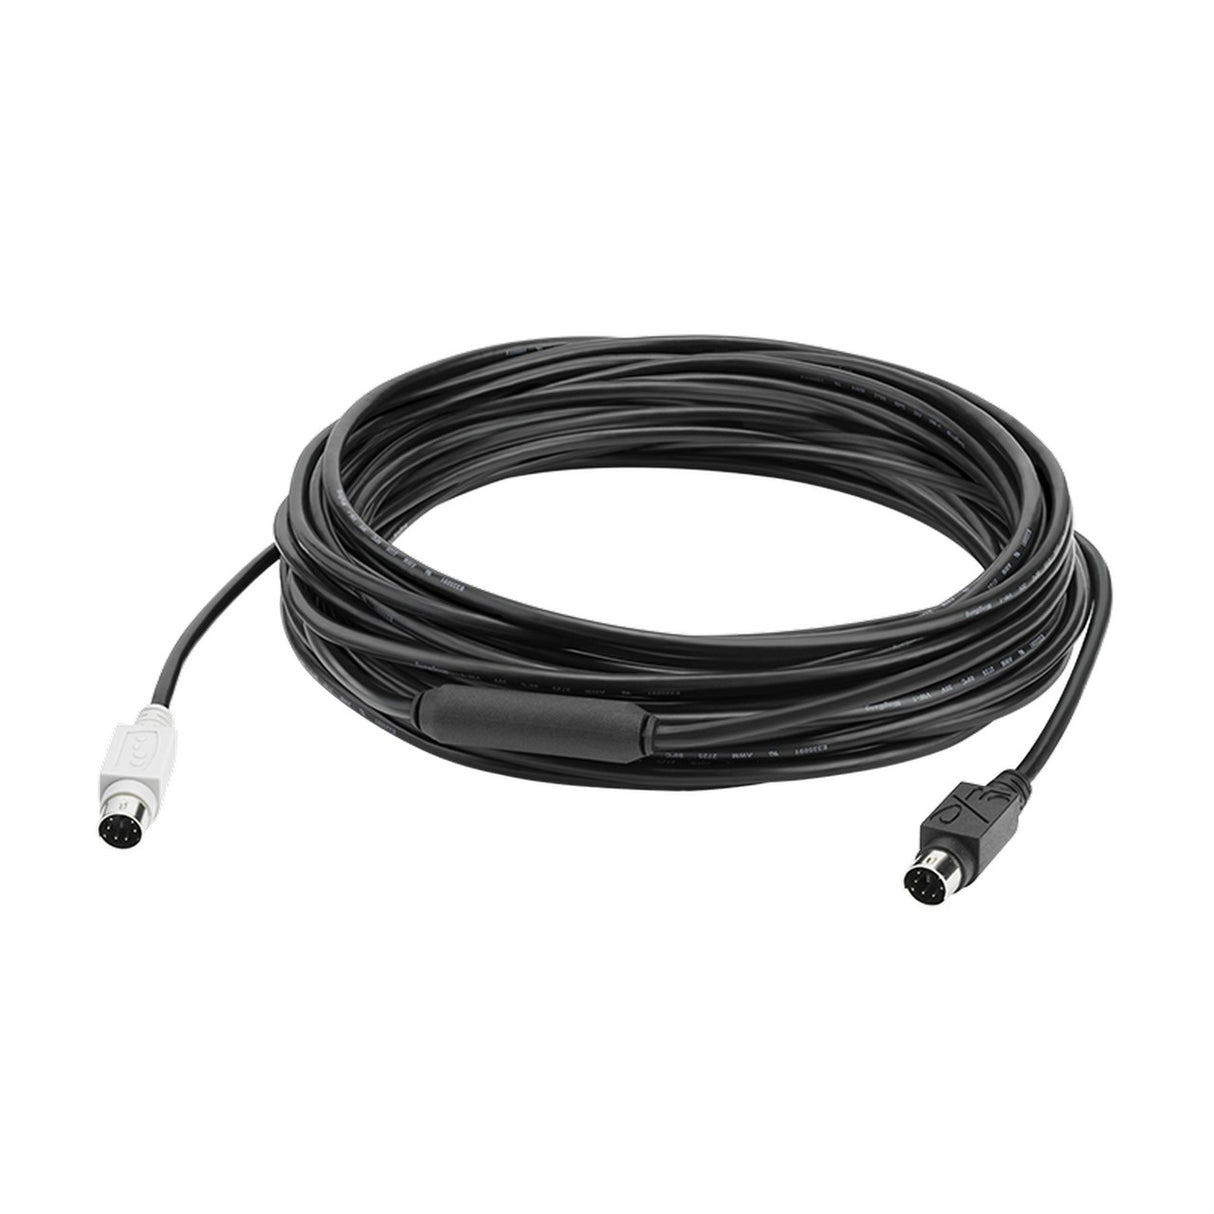 Logitech Group Extended Cable | 10 Meter Mini-Din Cable